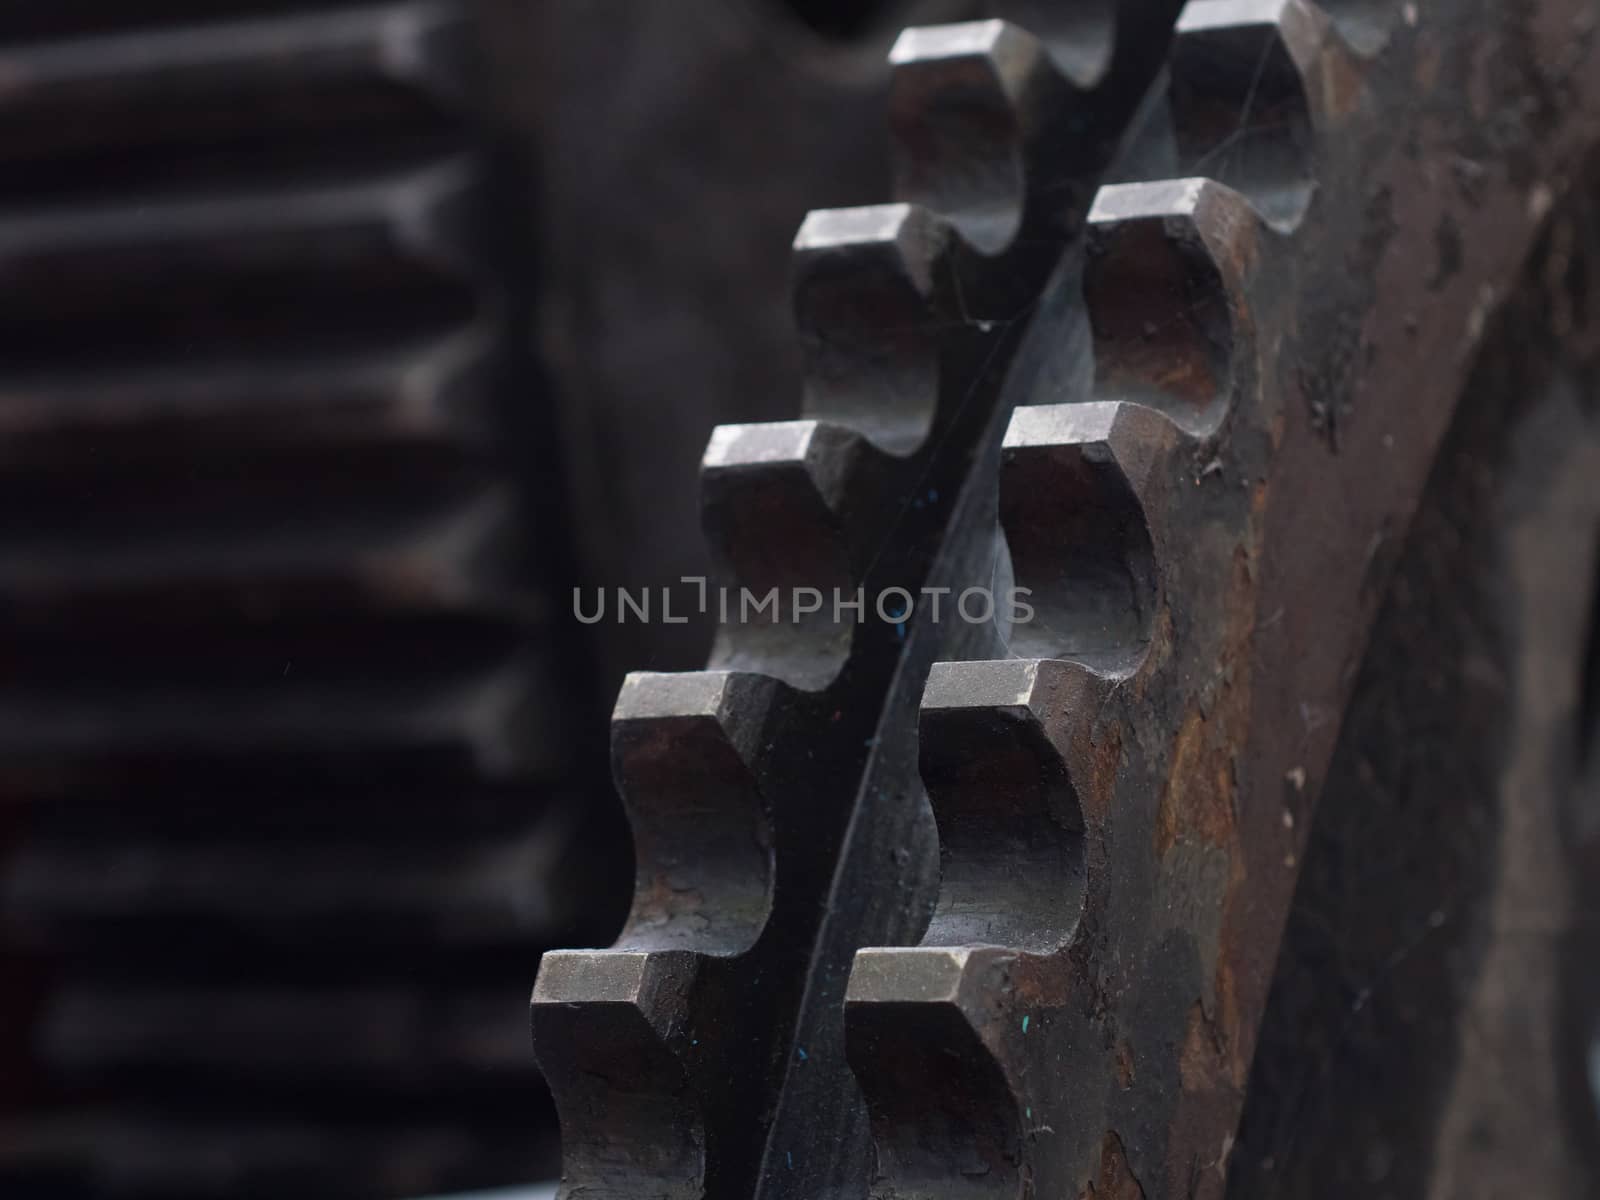 Detail of old, rusty cogwheel in industrial environment. Very shallow depth of field with only the nearest teeth in focus.